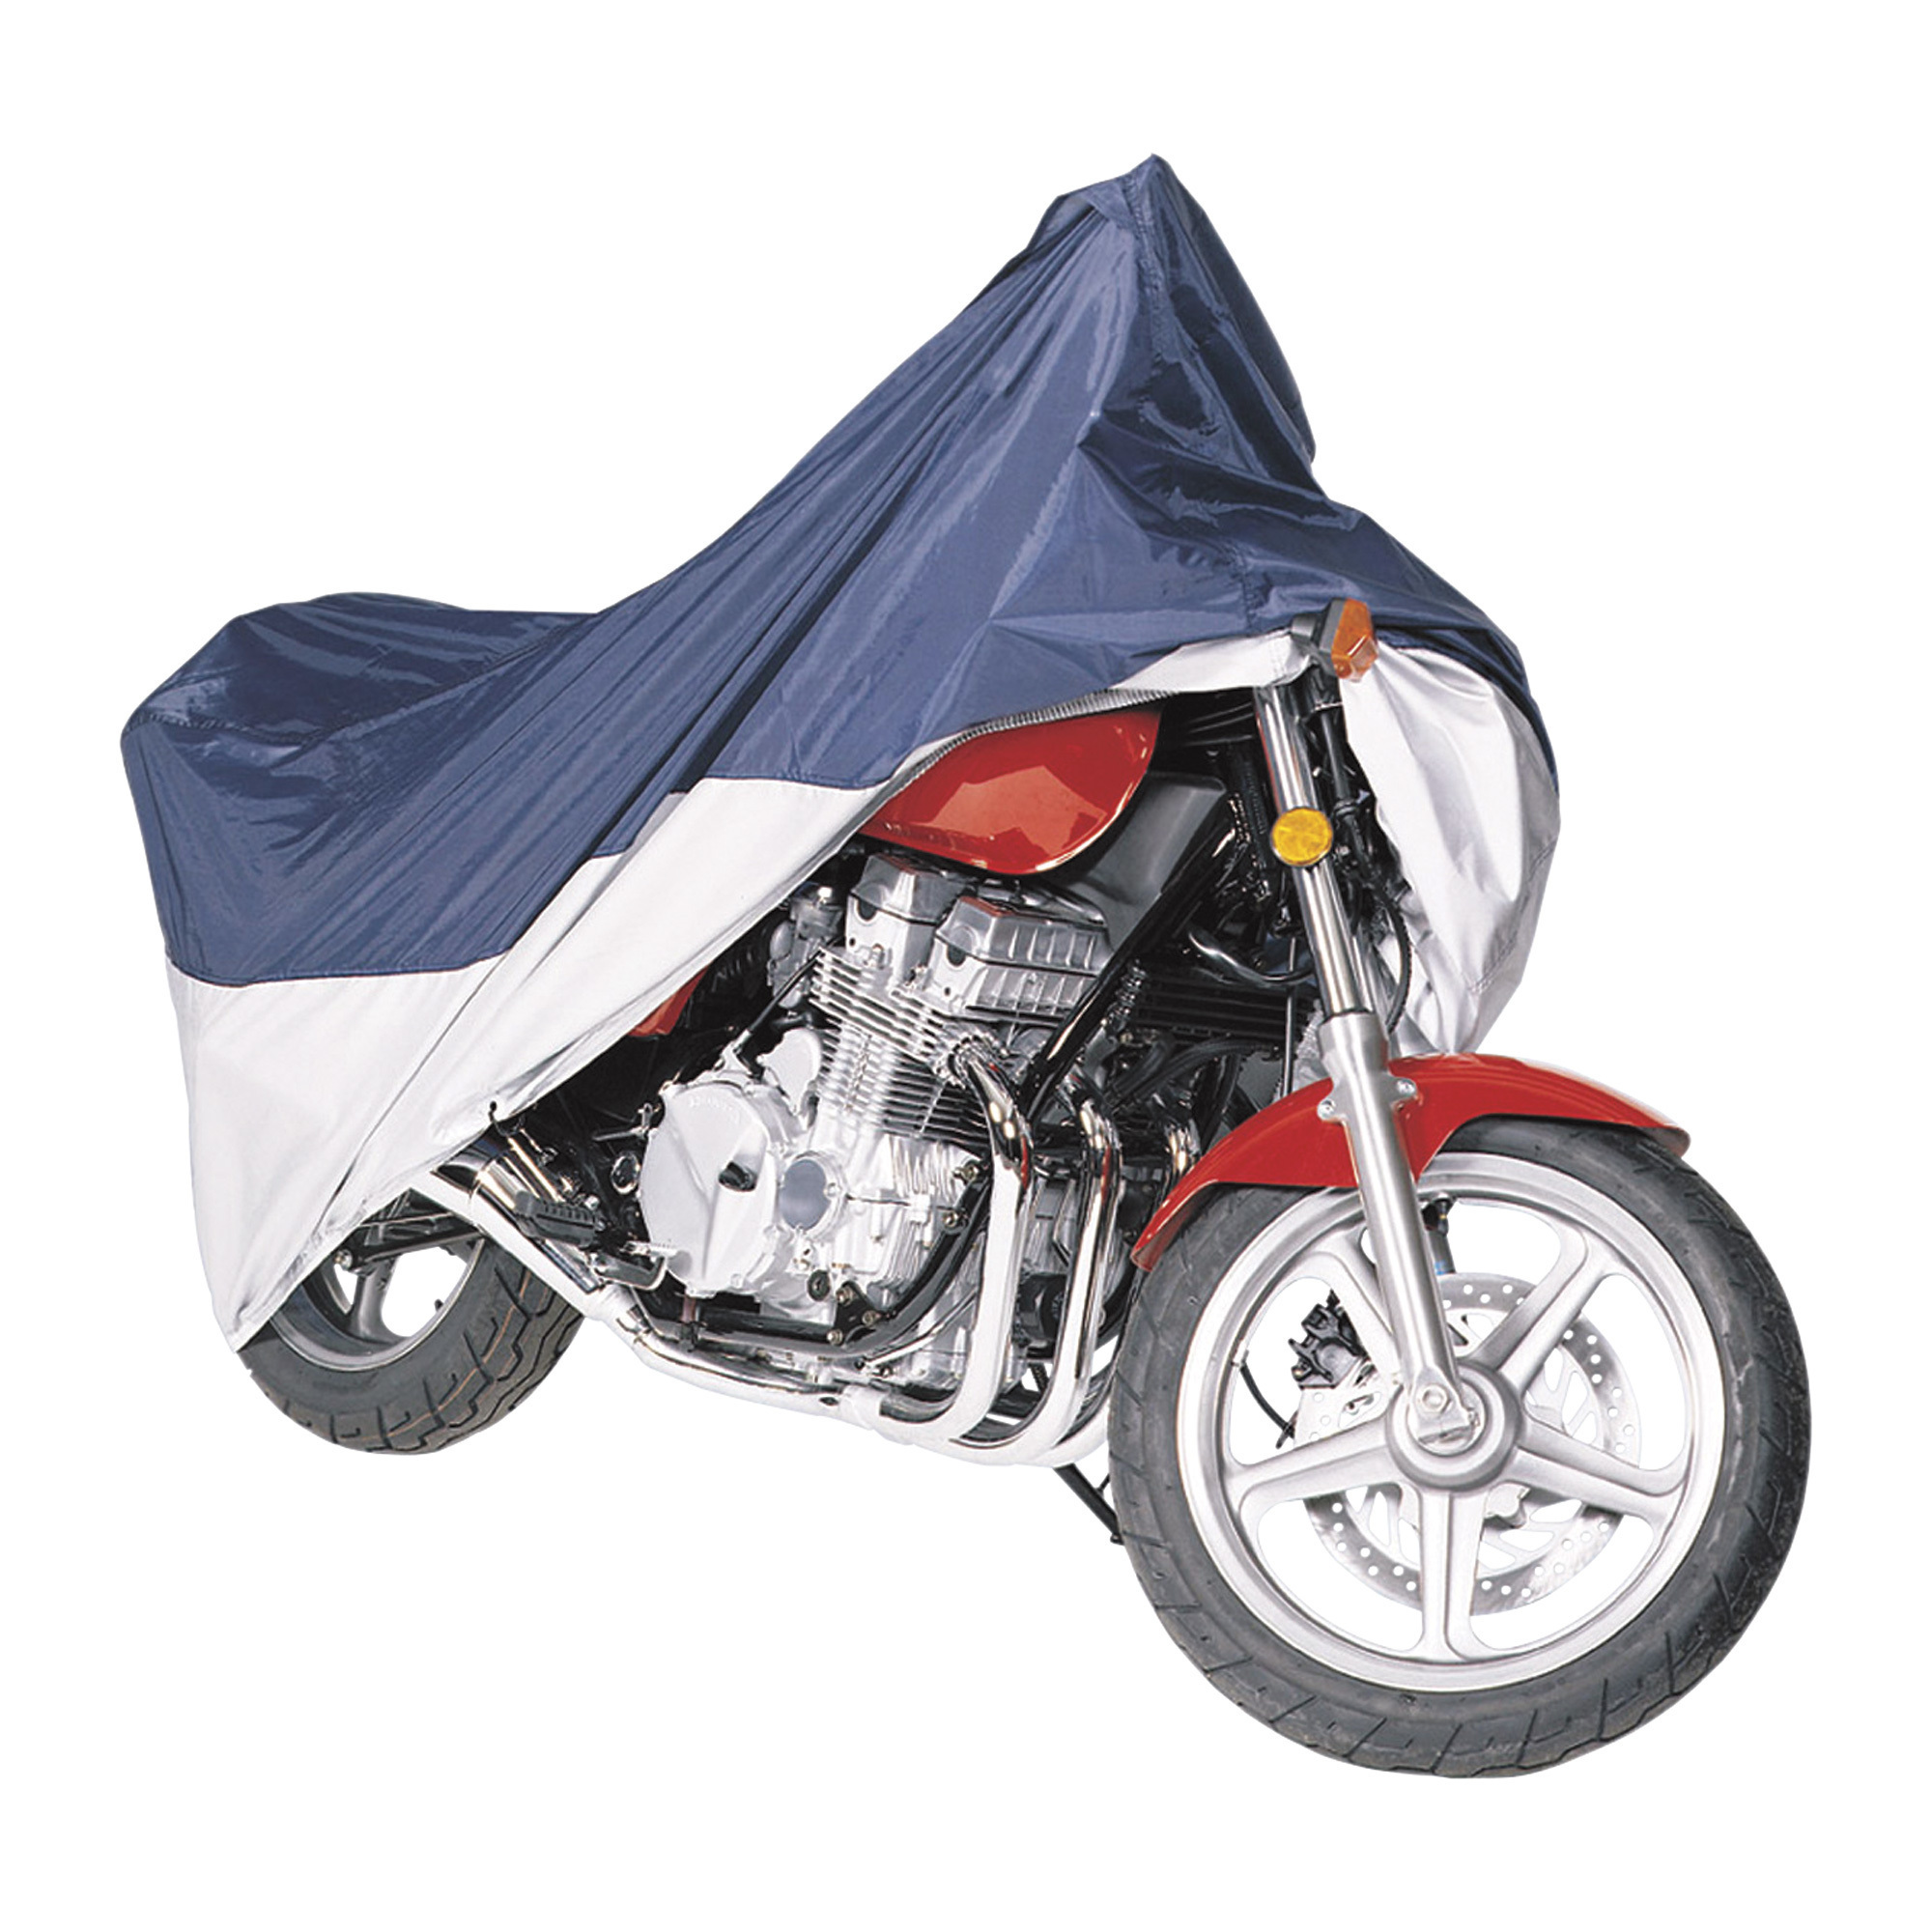 Classic Accessories MotoGear Motorcycle Cover - Large, Blue and Silver, Fits Motorcycles up to 1,100cc, Model 65-005-033501-00